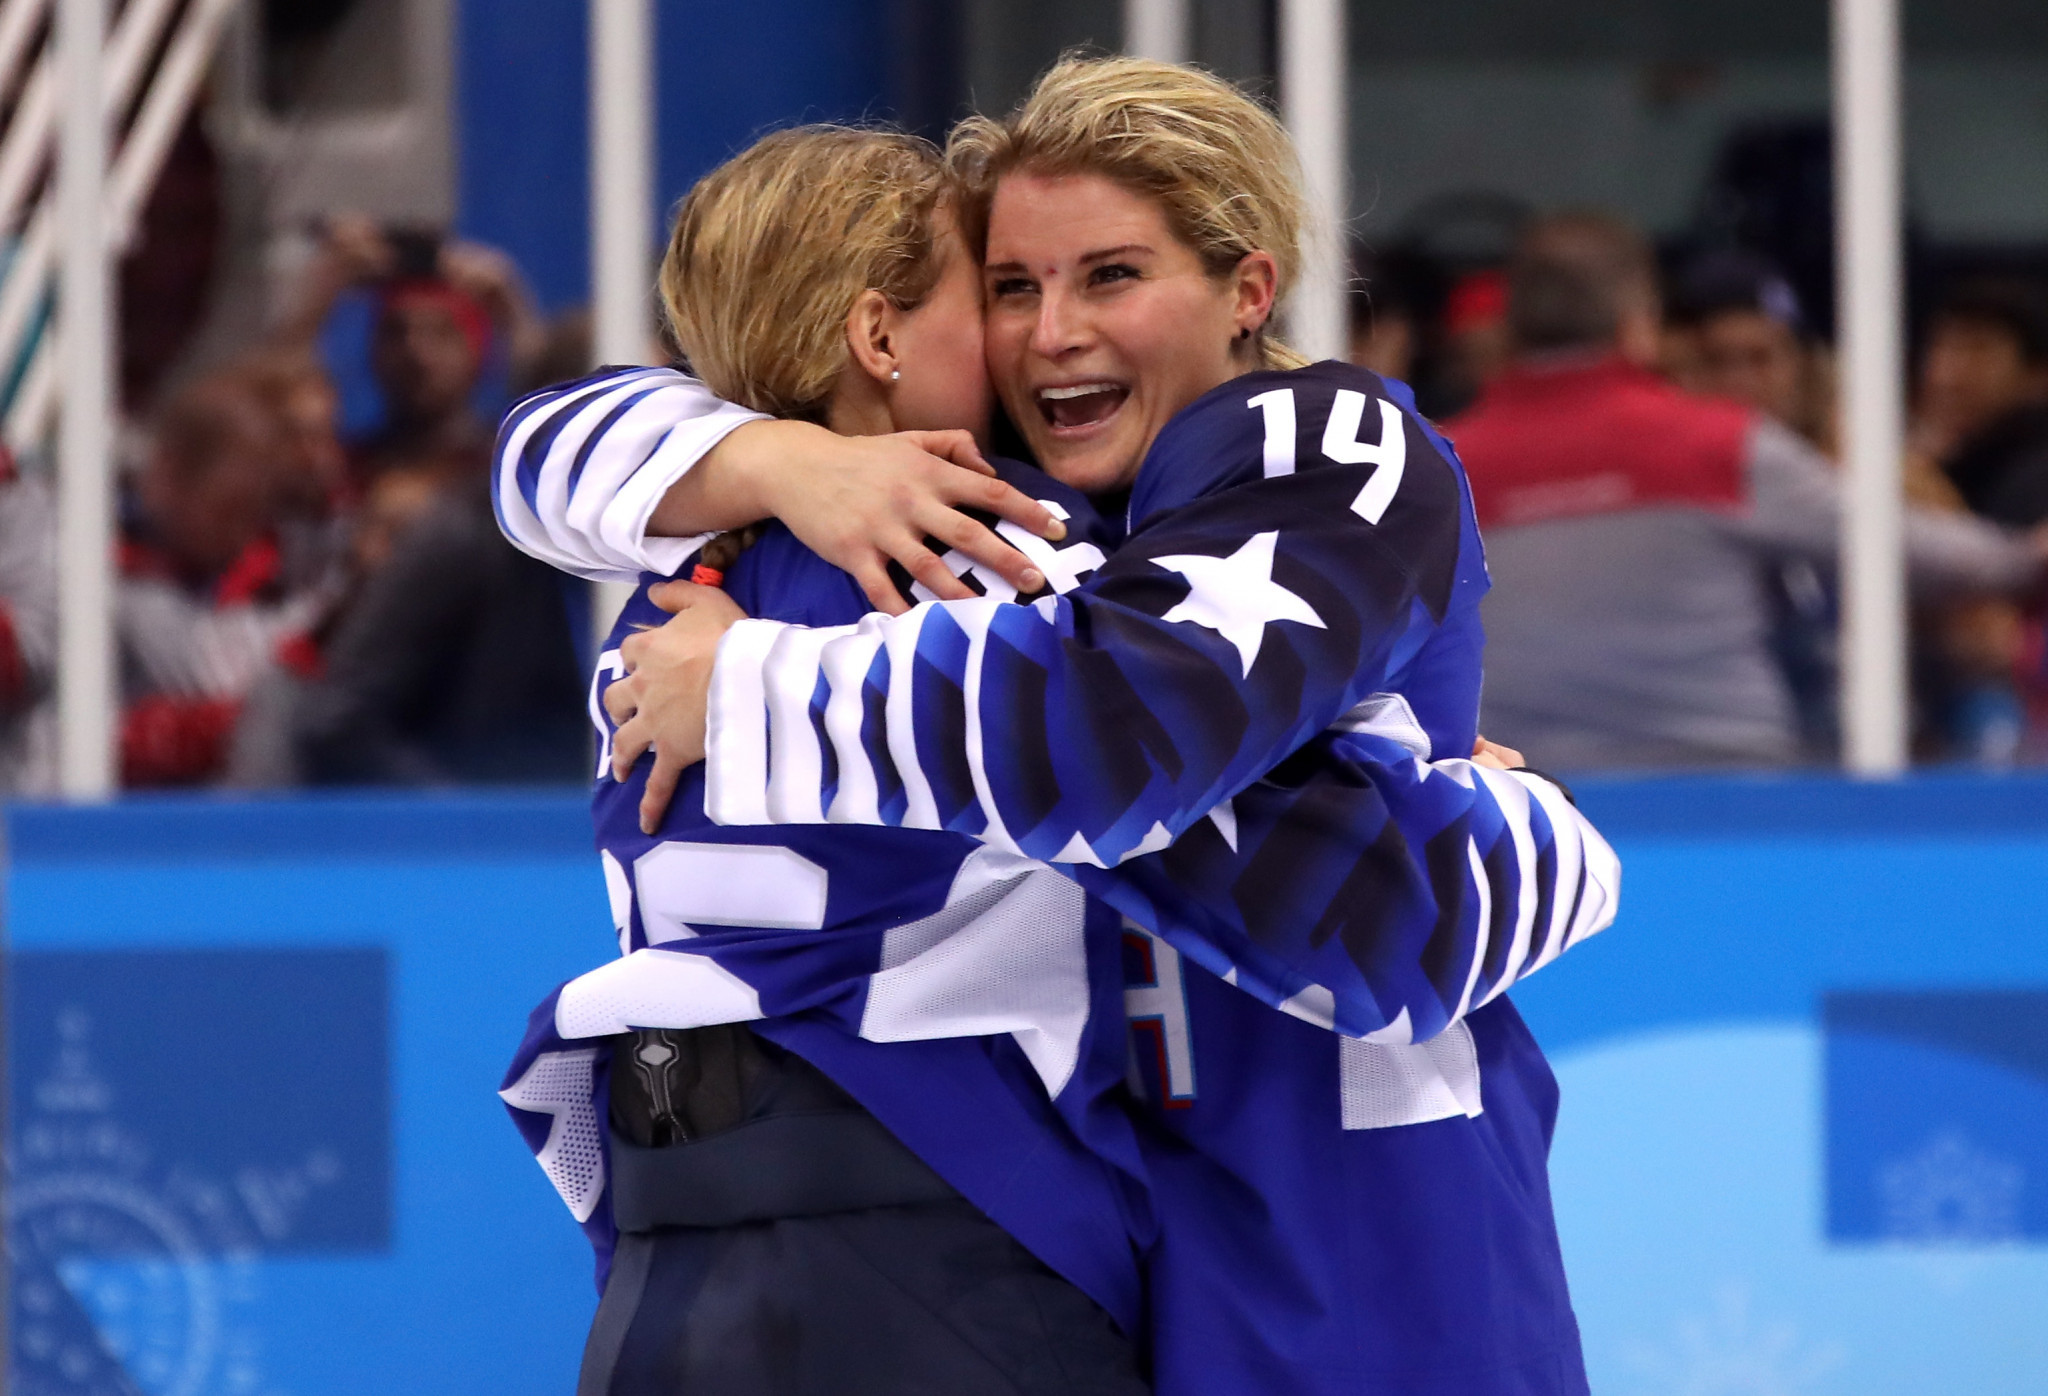 Brianna Decker, right, won gold at the 2018 Winter Olympics in Pyeongchang ©Getty Images